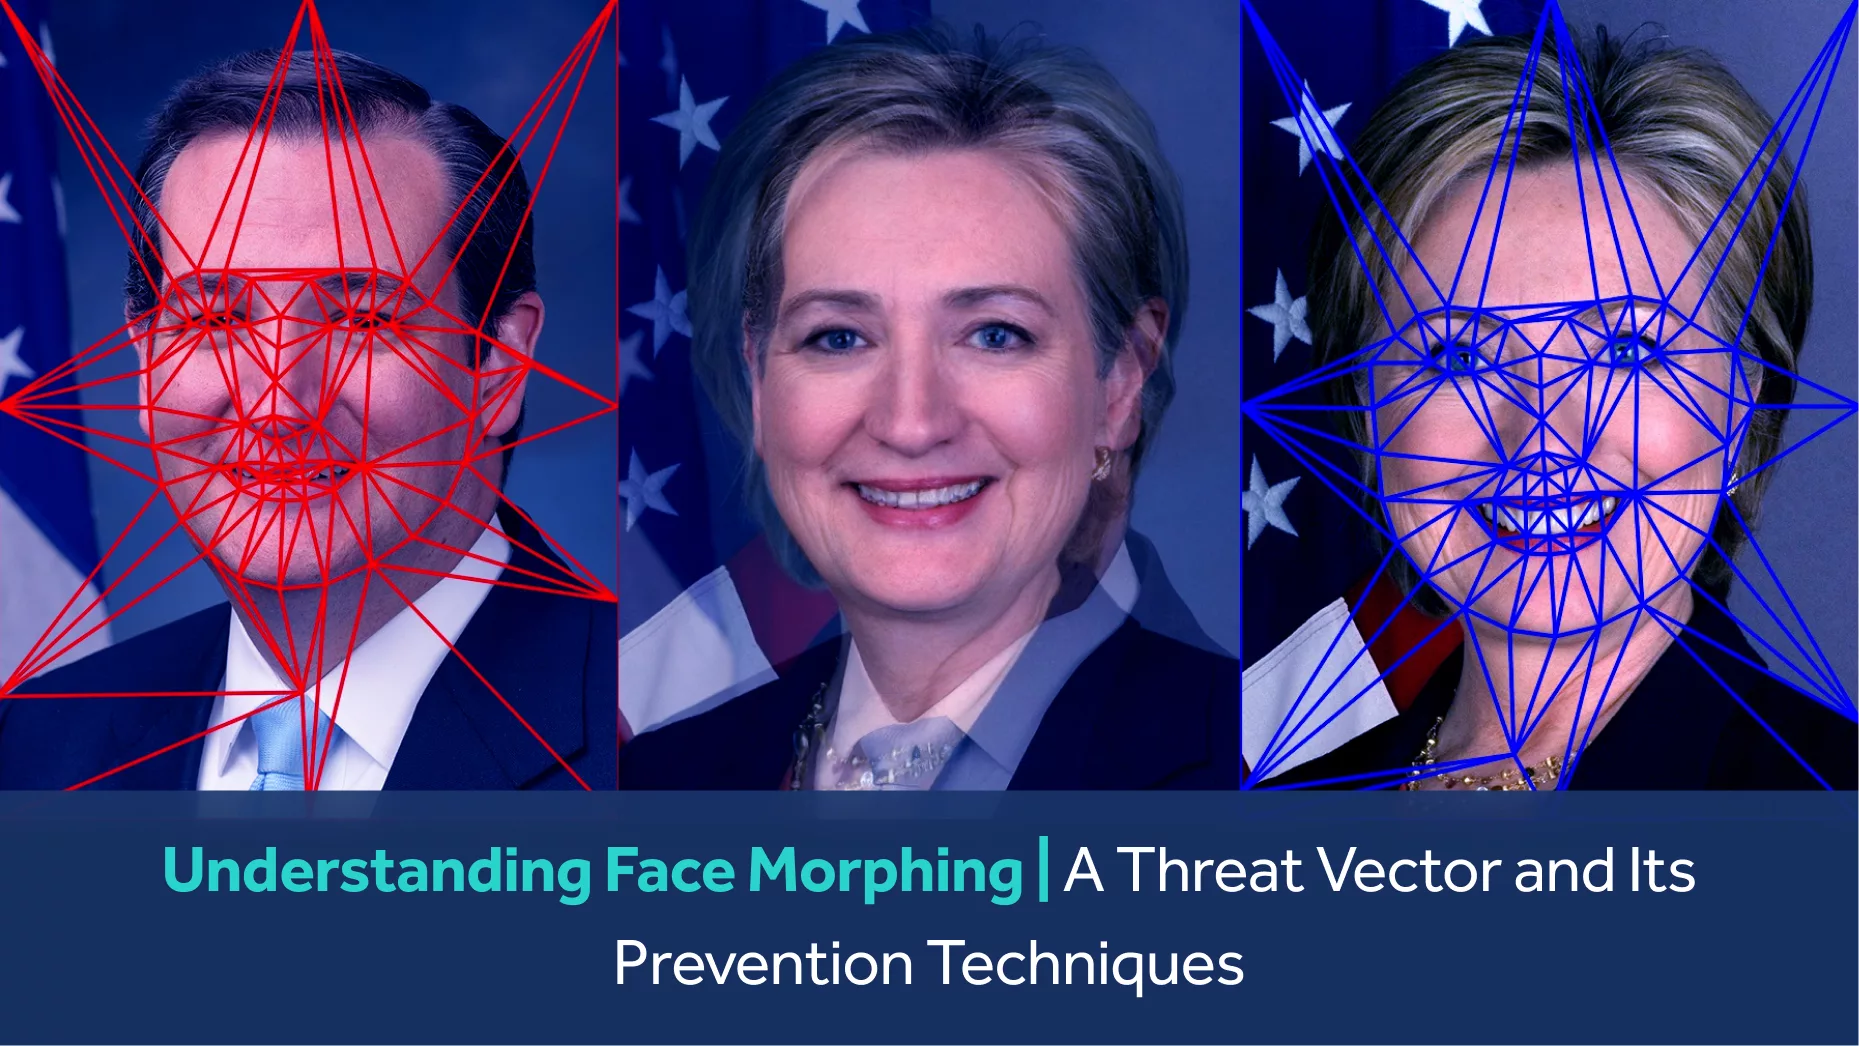 Understanding Face Morphing | A Threat Vector and Its Prevention Techniques